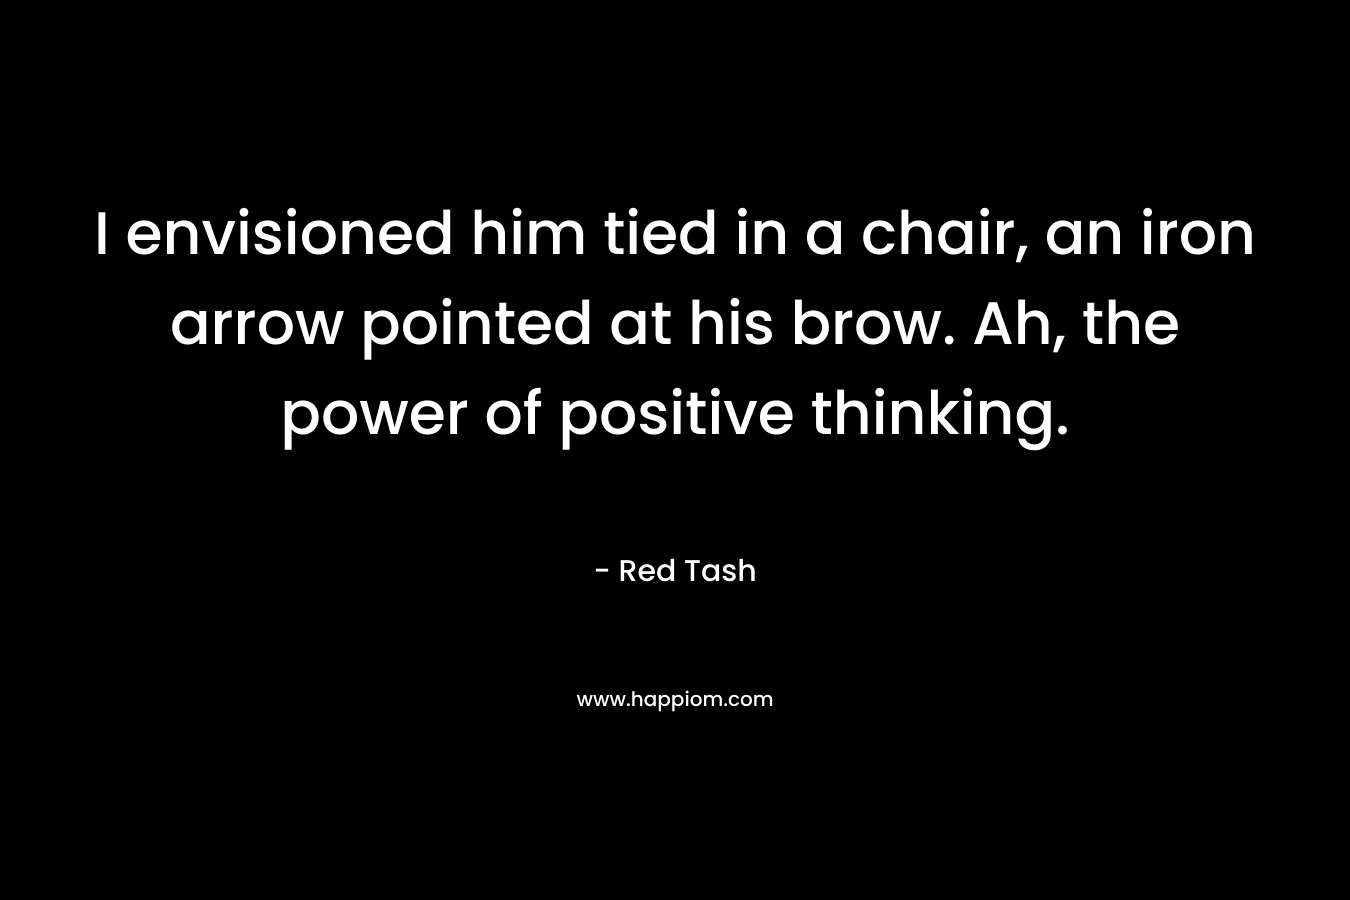 I envisioned him tied in a chair, an iron arrow pointed at his brow. Ah, the power of positive thinking. – Red Tash